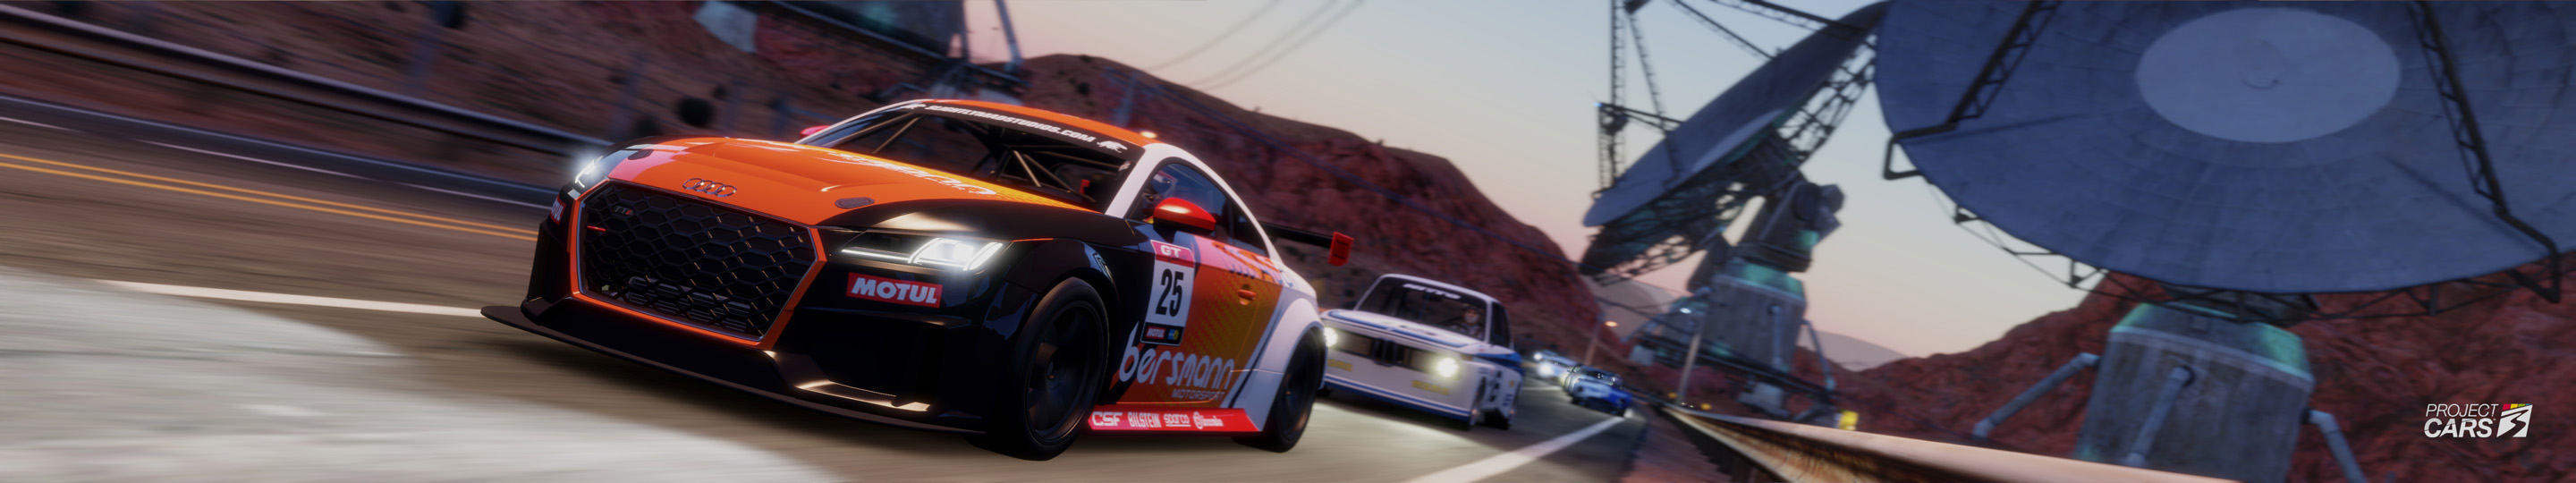 2 PROJECT CARS 3 MONUMENT CANYON with PIR RANGE CARS copy.jpg